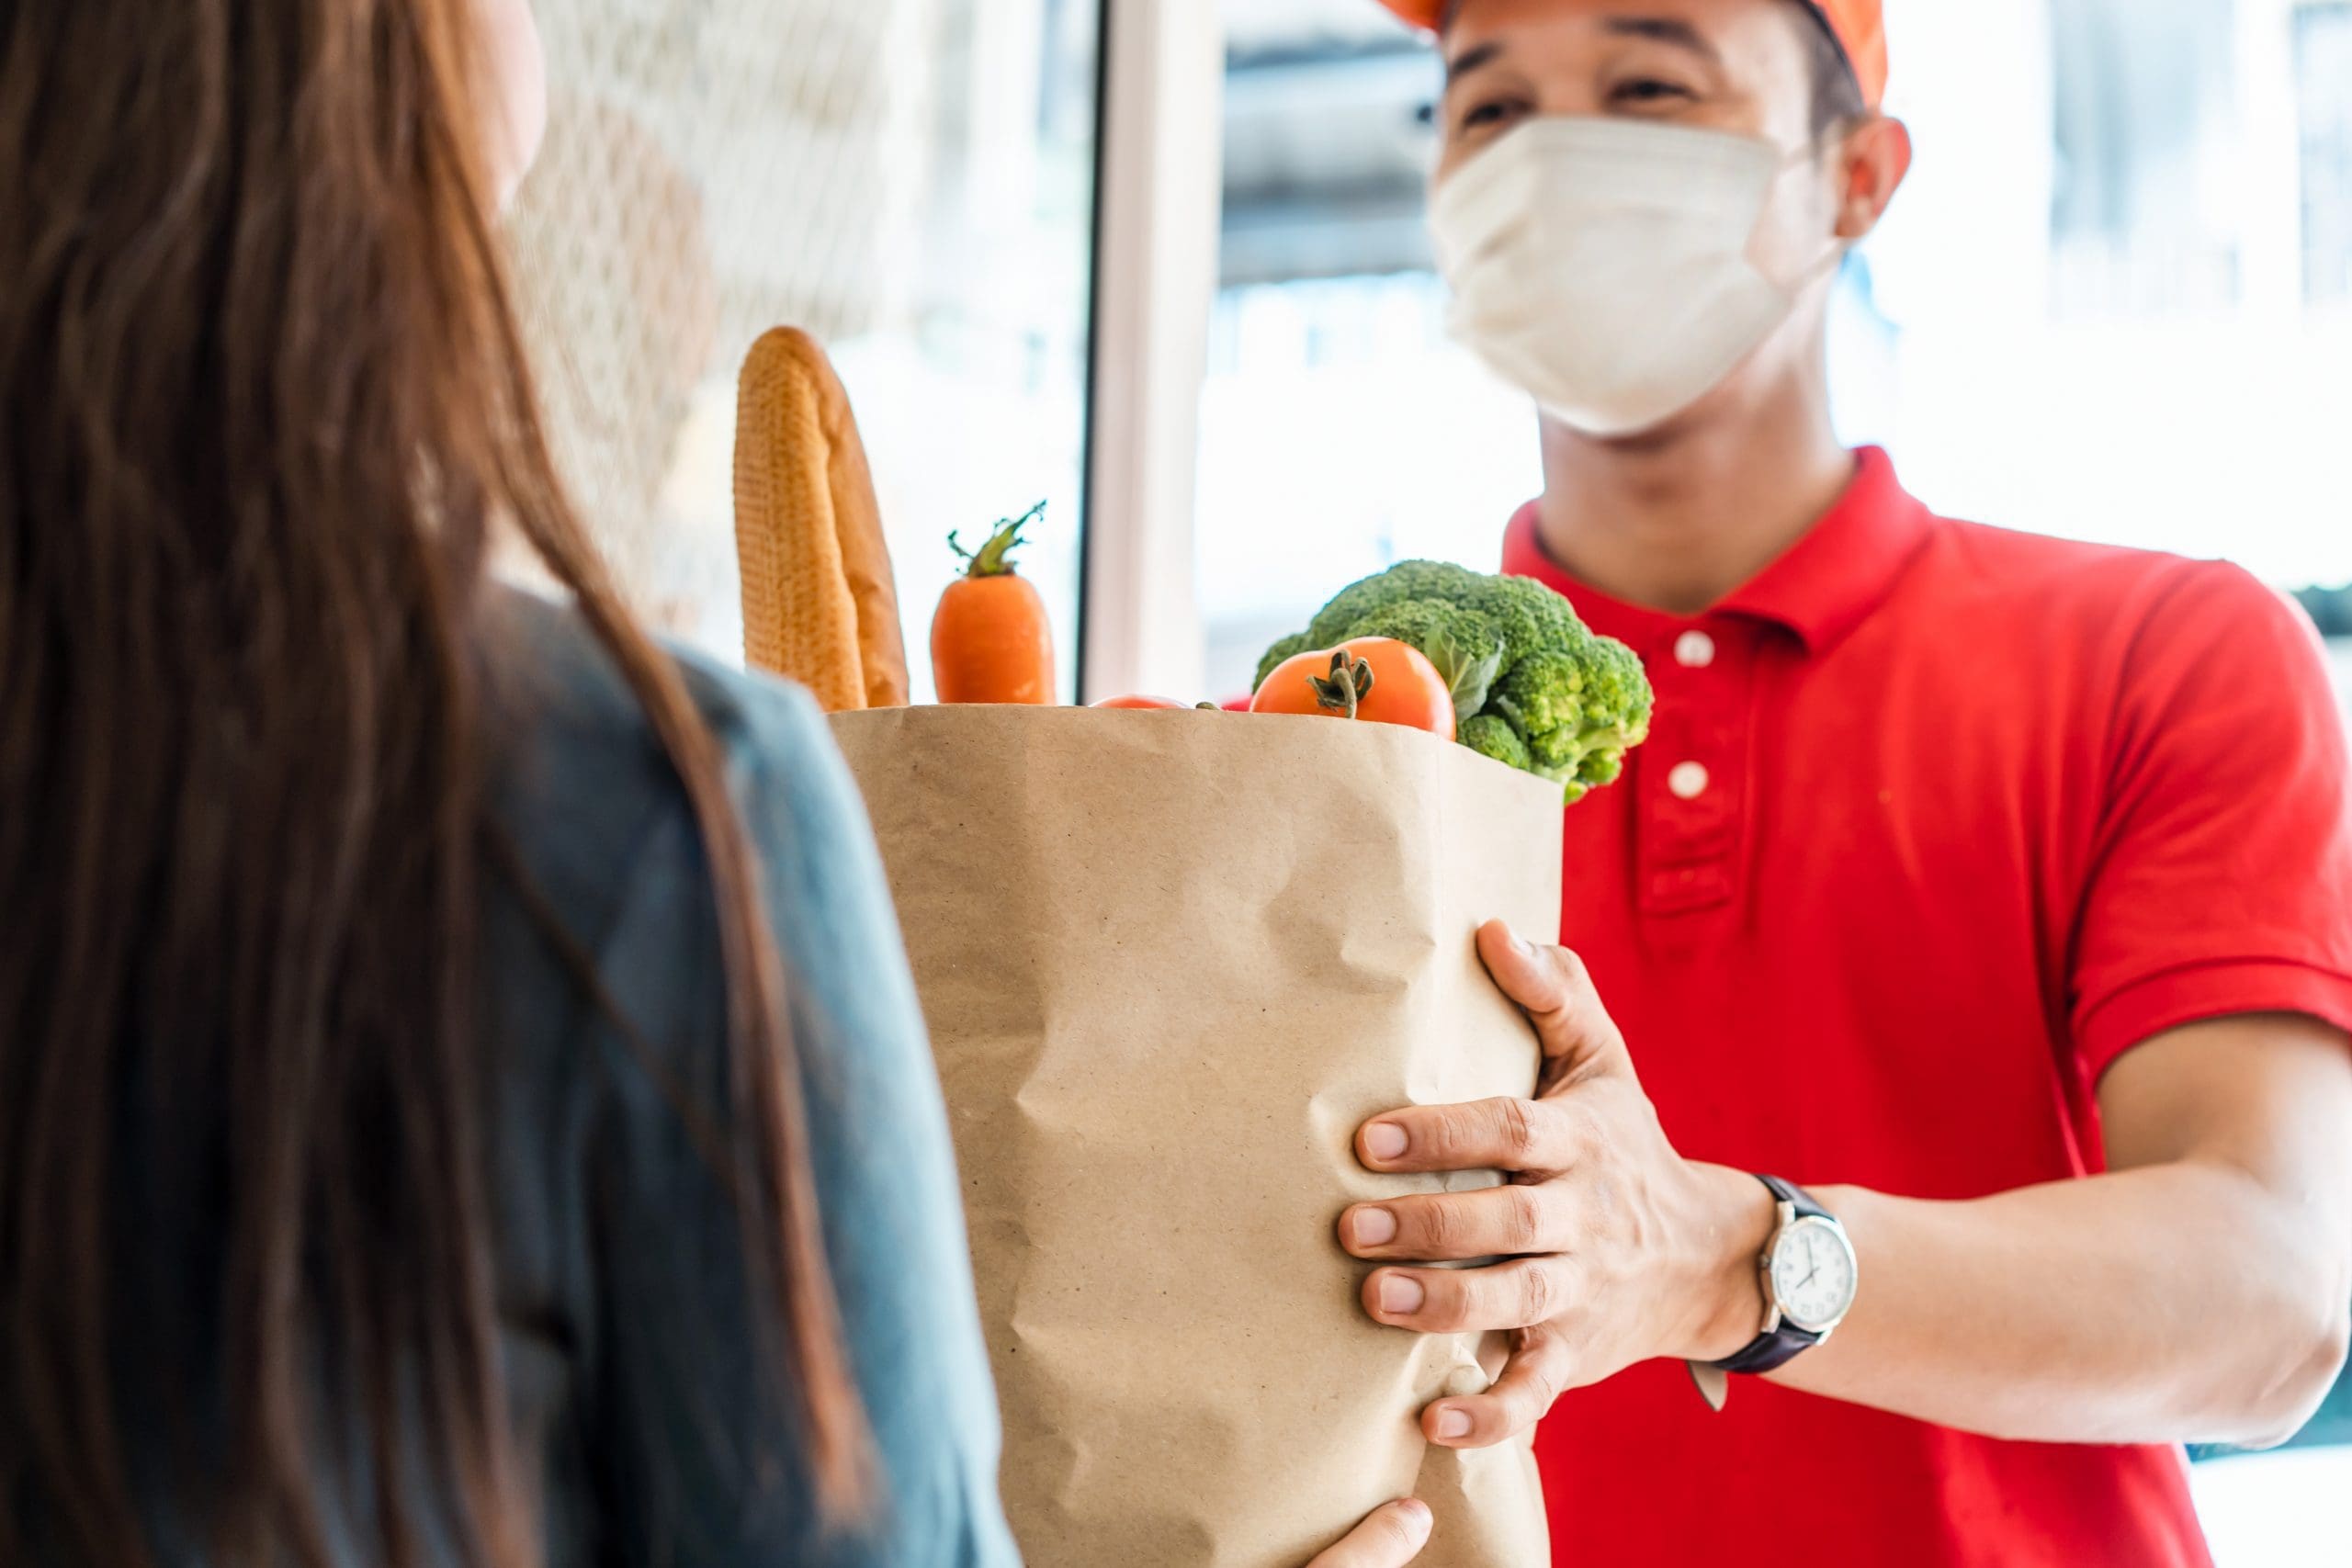 How Last Mile Delivery is Helping Grocers Meet Growing Demands